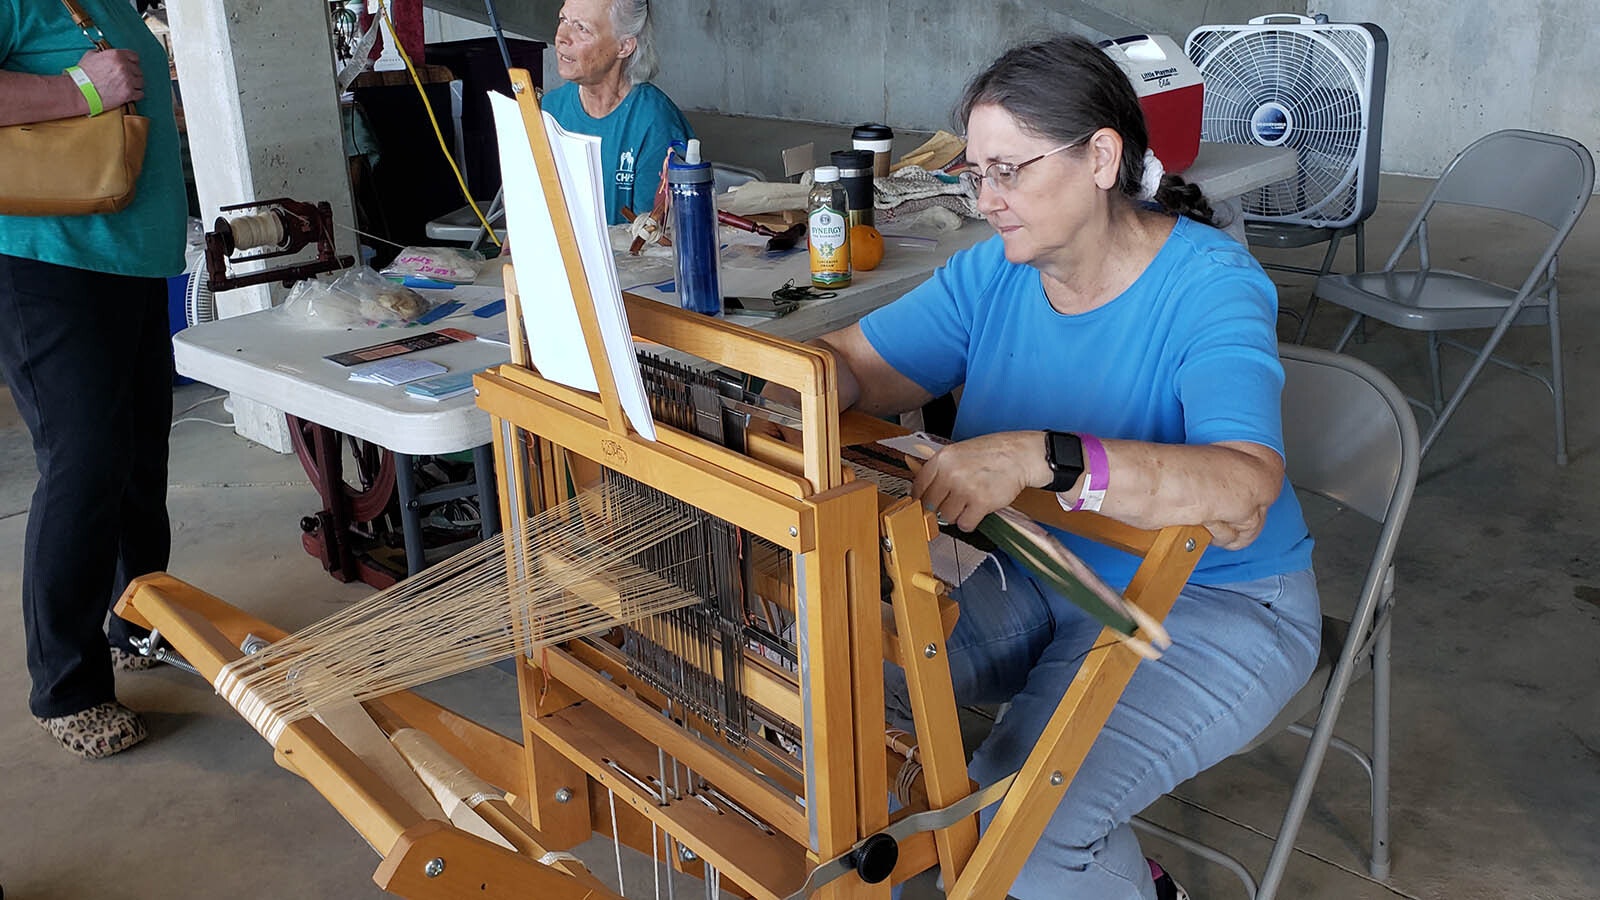 A demonstration of how to work a loom.